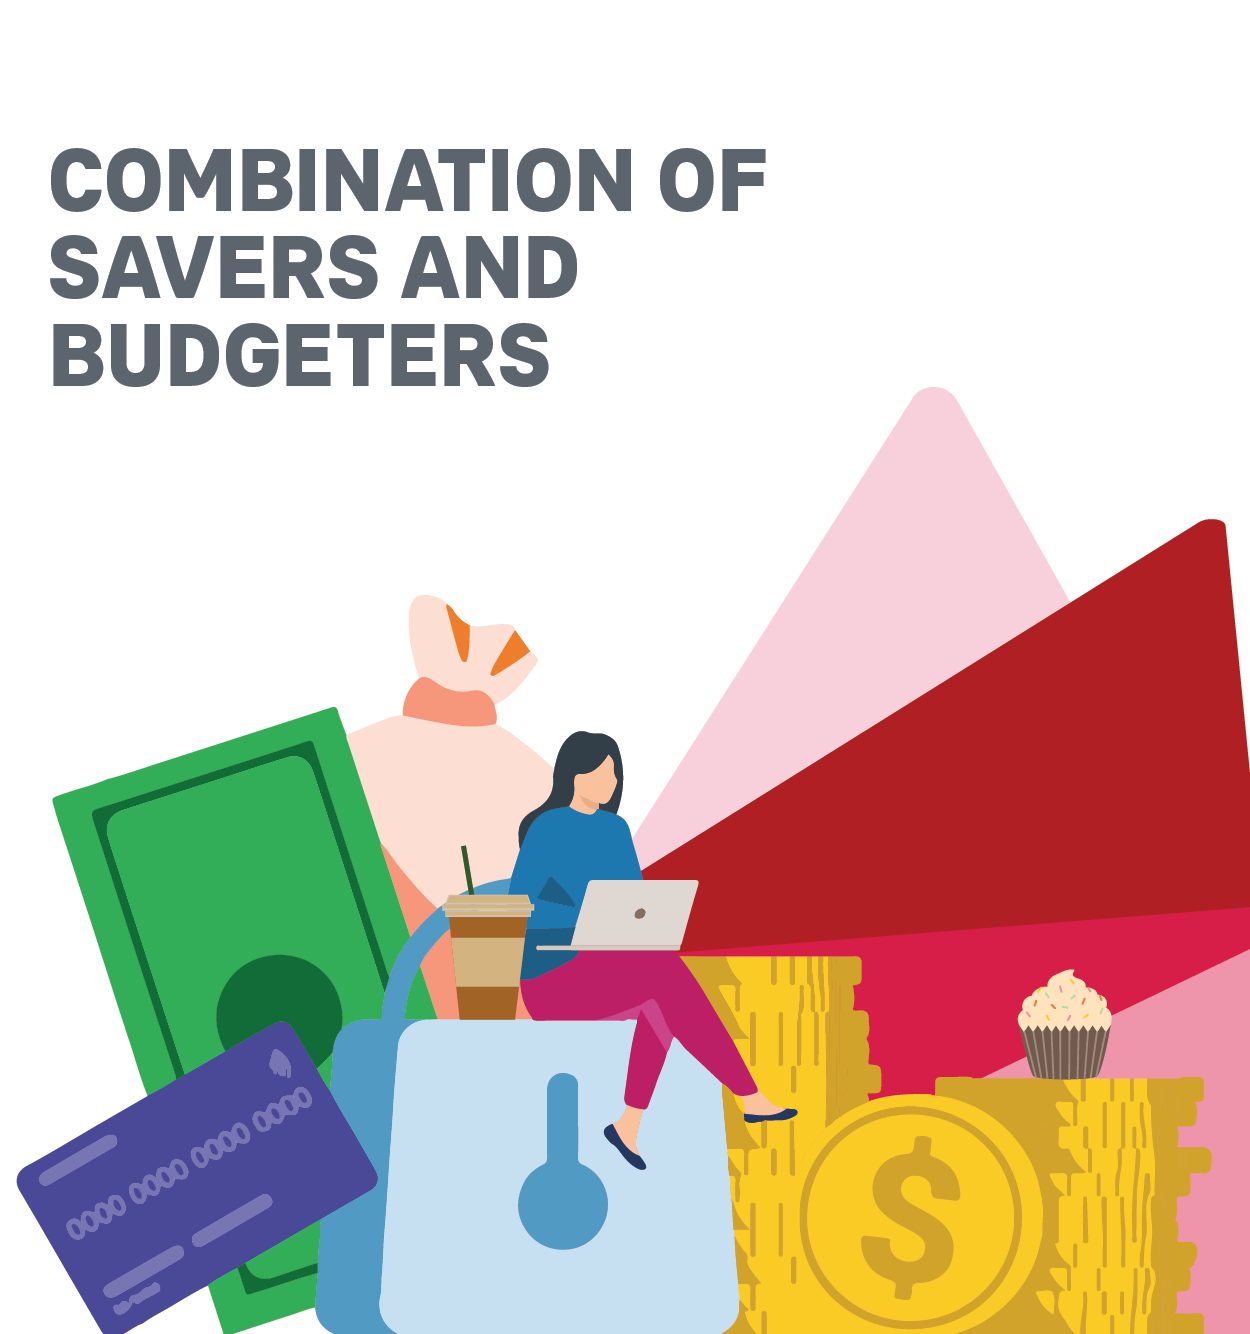 Combination of Savers and Budgeters